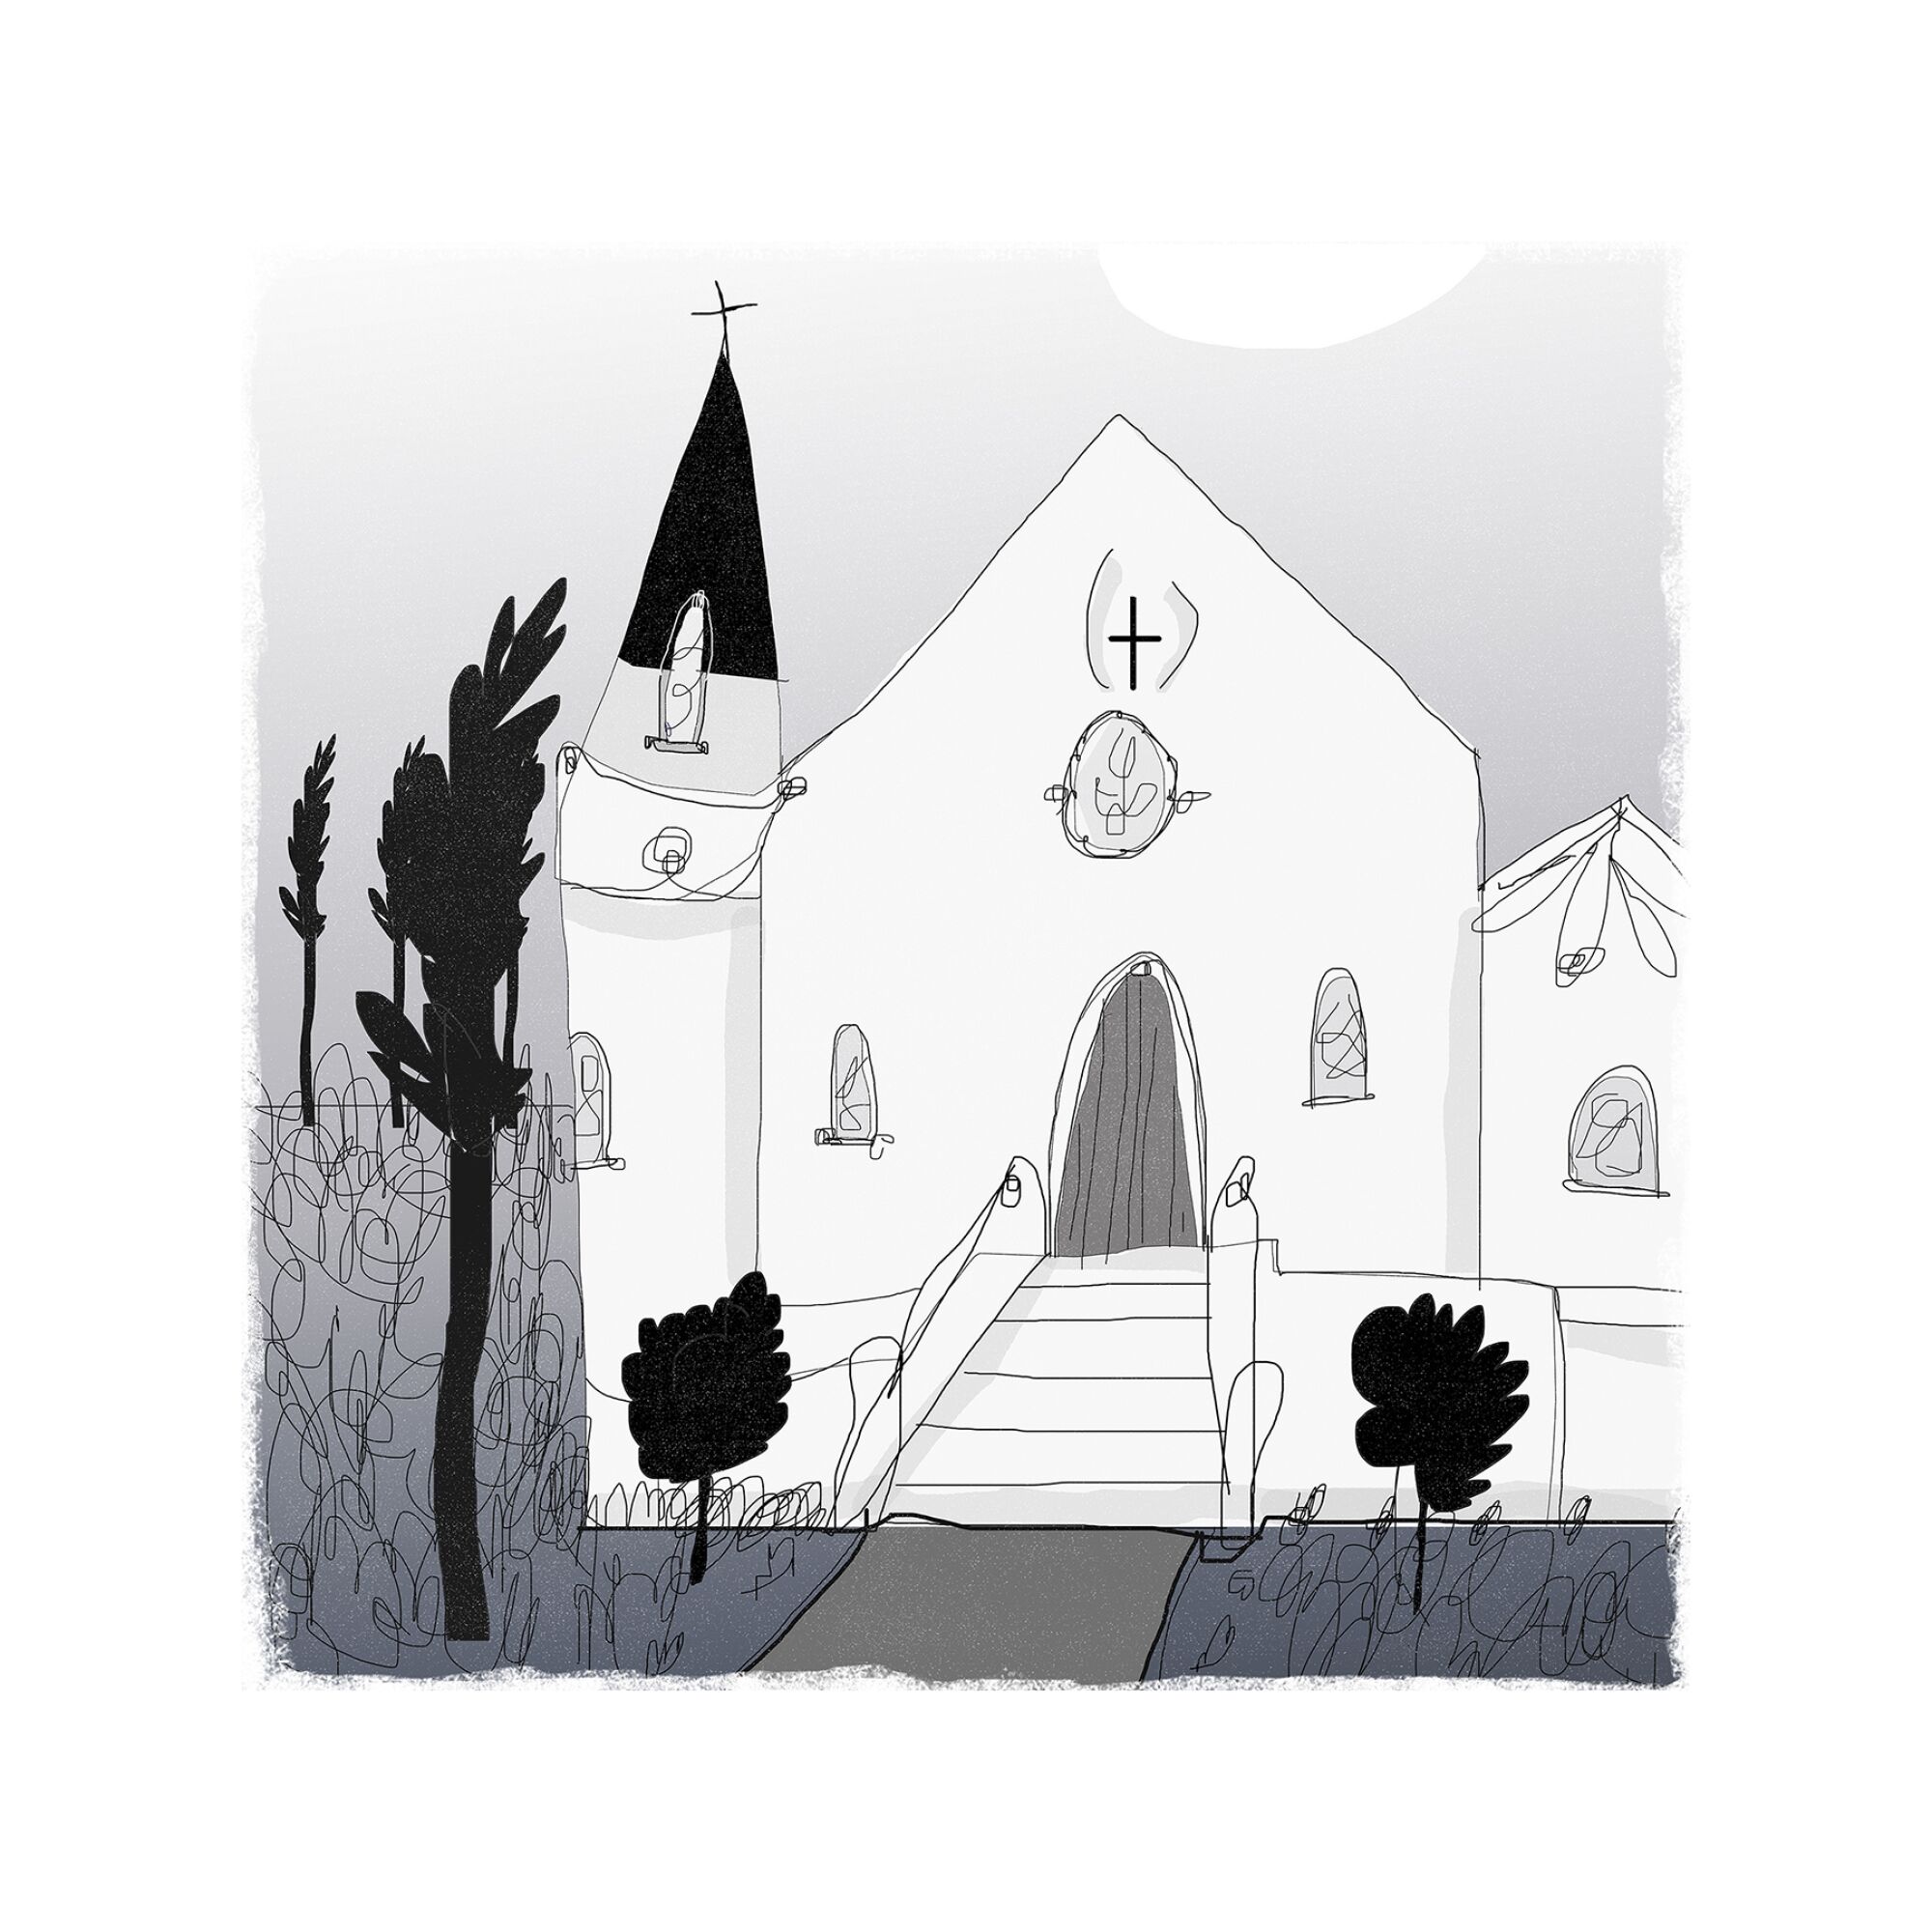 Black-and-white illustration of Mother Emanuel AME Church in Charleston, S.C.